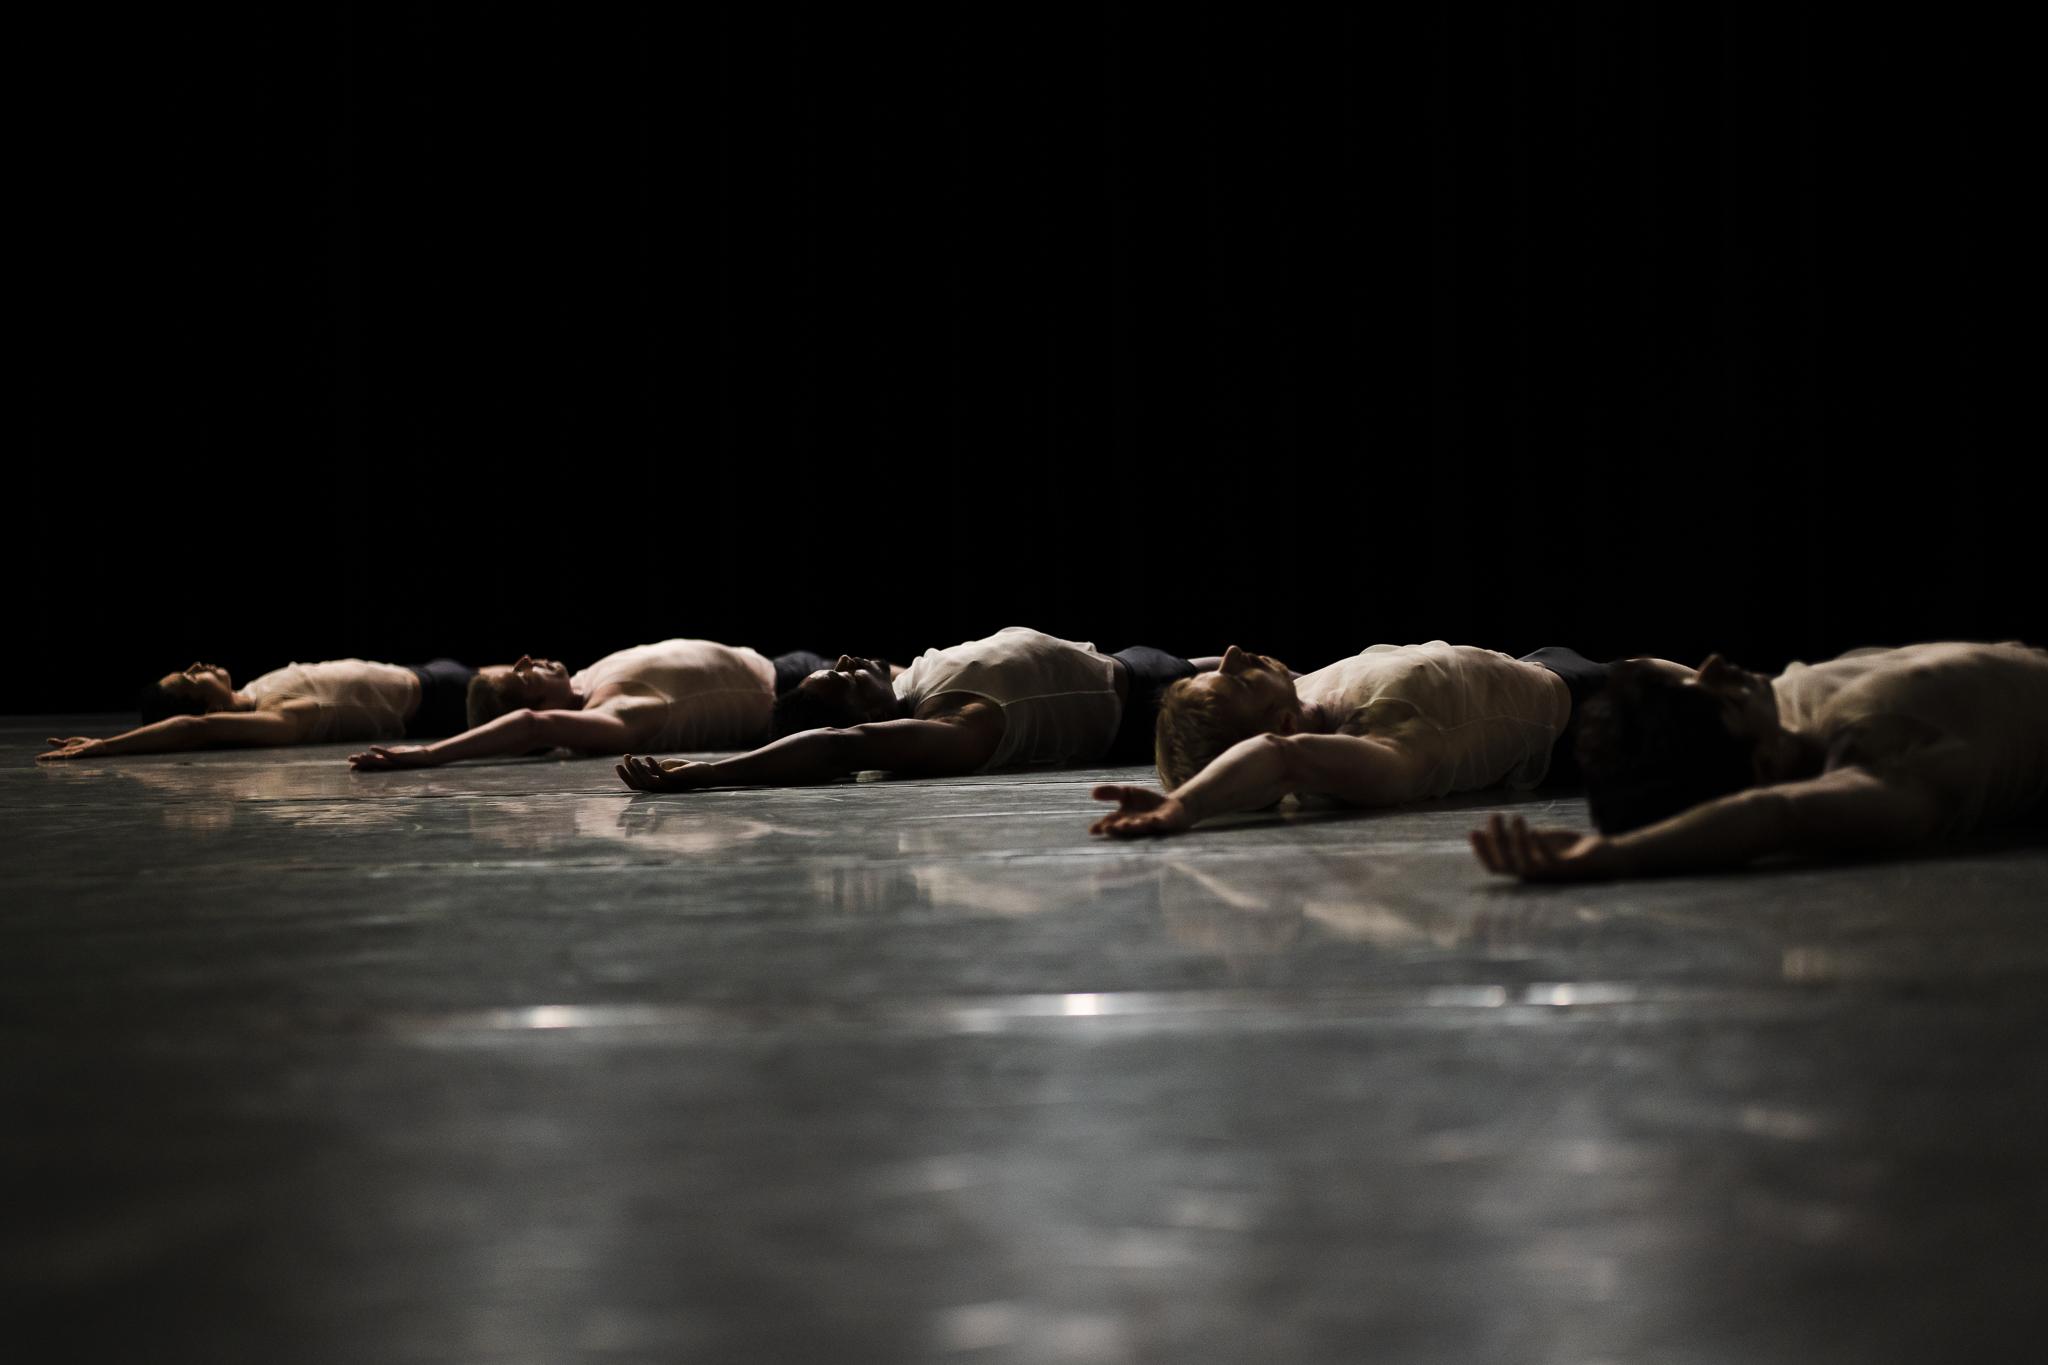 Dancers from the L.A. Dance Project lying on a black stage with their right arm raised.